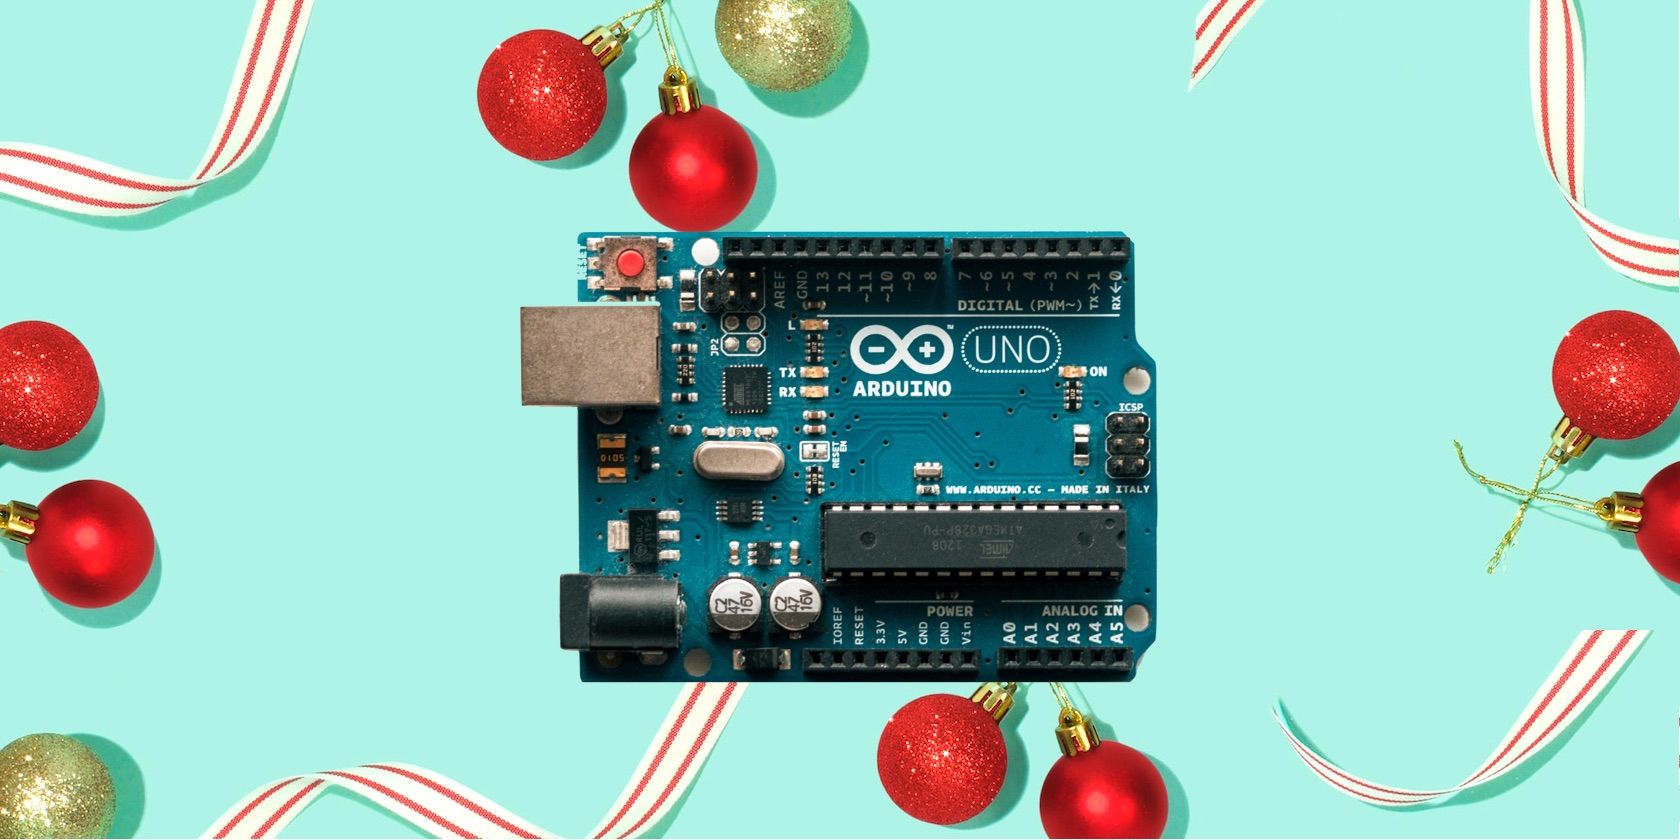 An arduino microcontroller board on a blue background with christmas decorations around the border